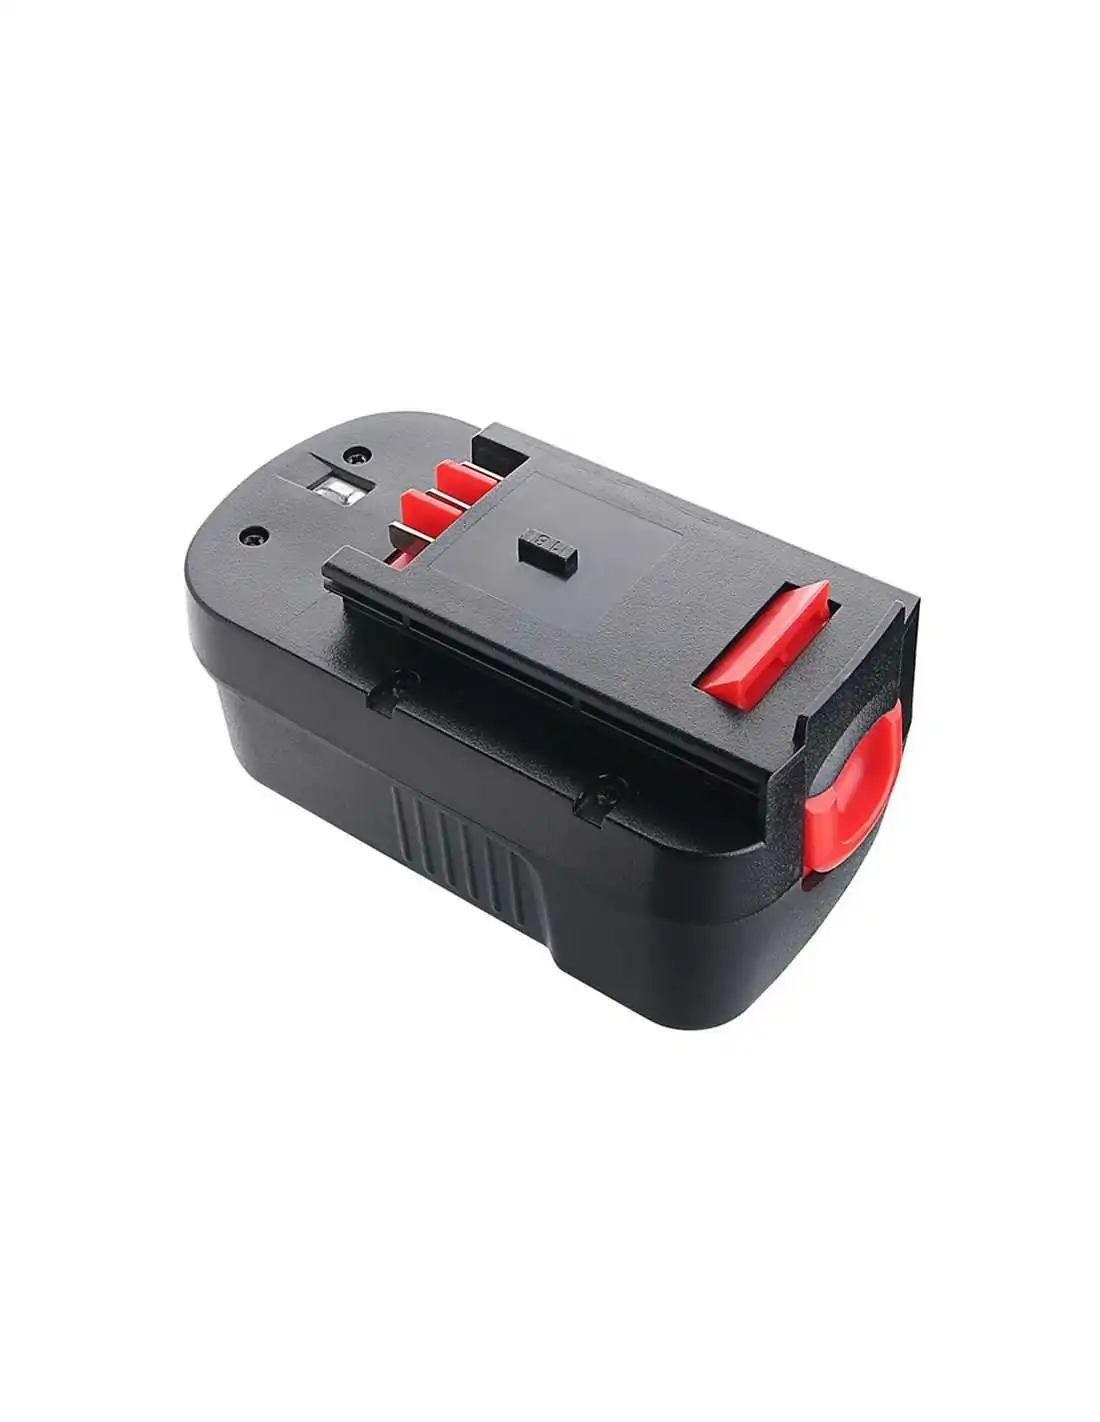 HPB18 18V HPB18-OPE 244760-00 4800mAh NI-MH BATTERY REPLACE FOR